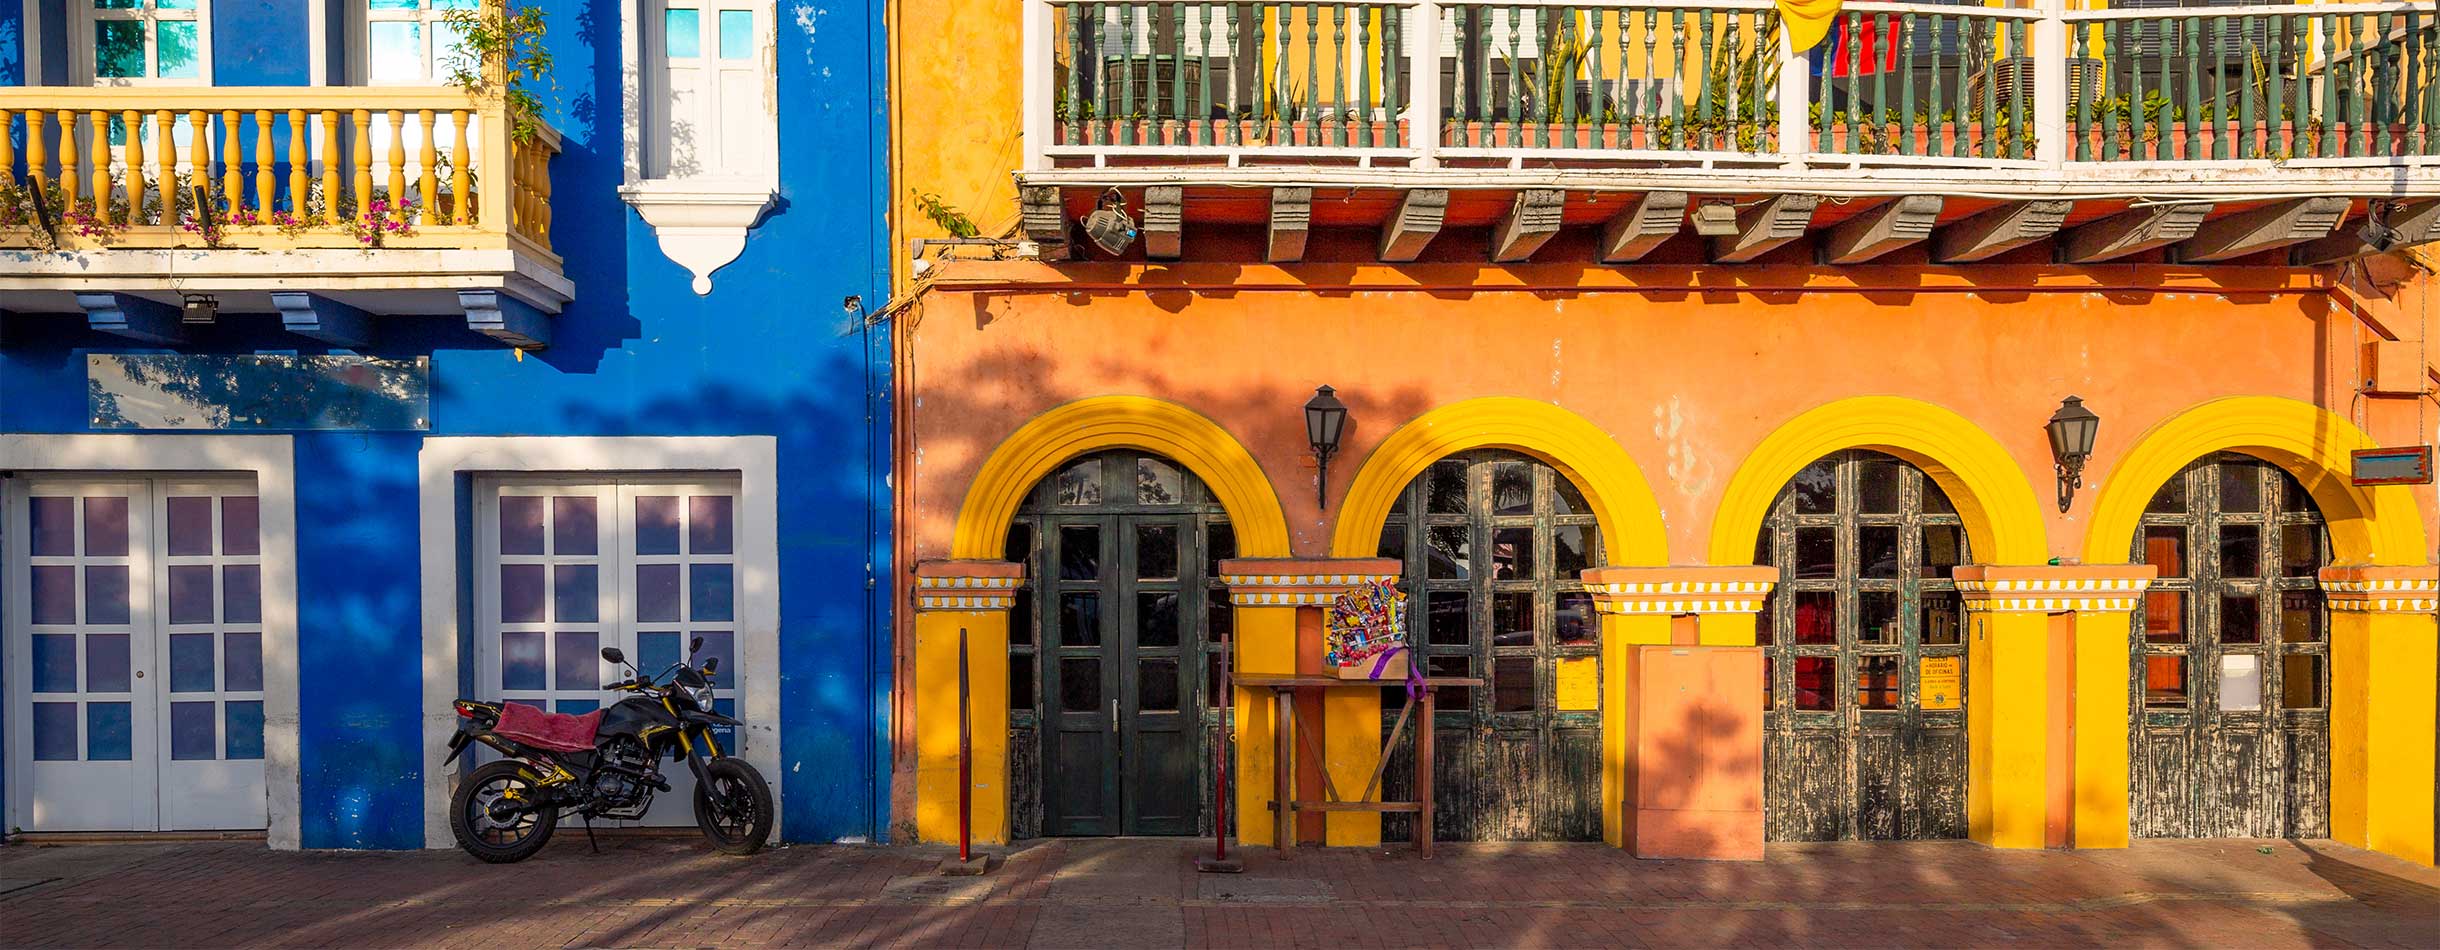 Colourful buildings, Colombia 